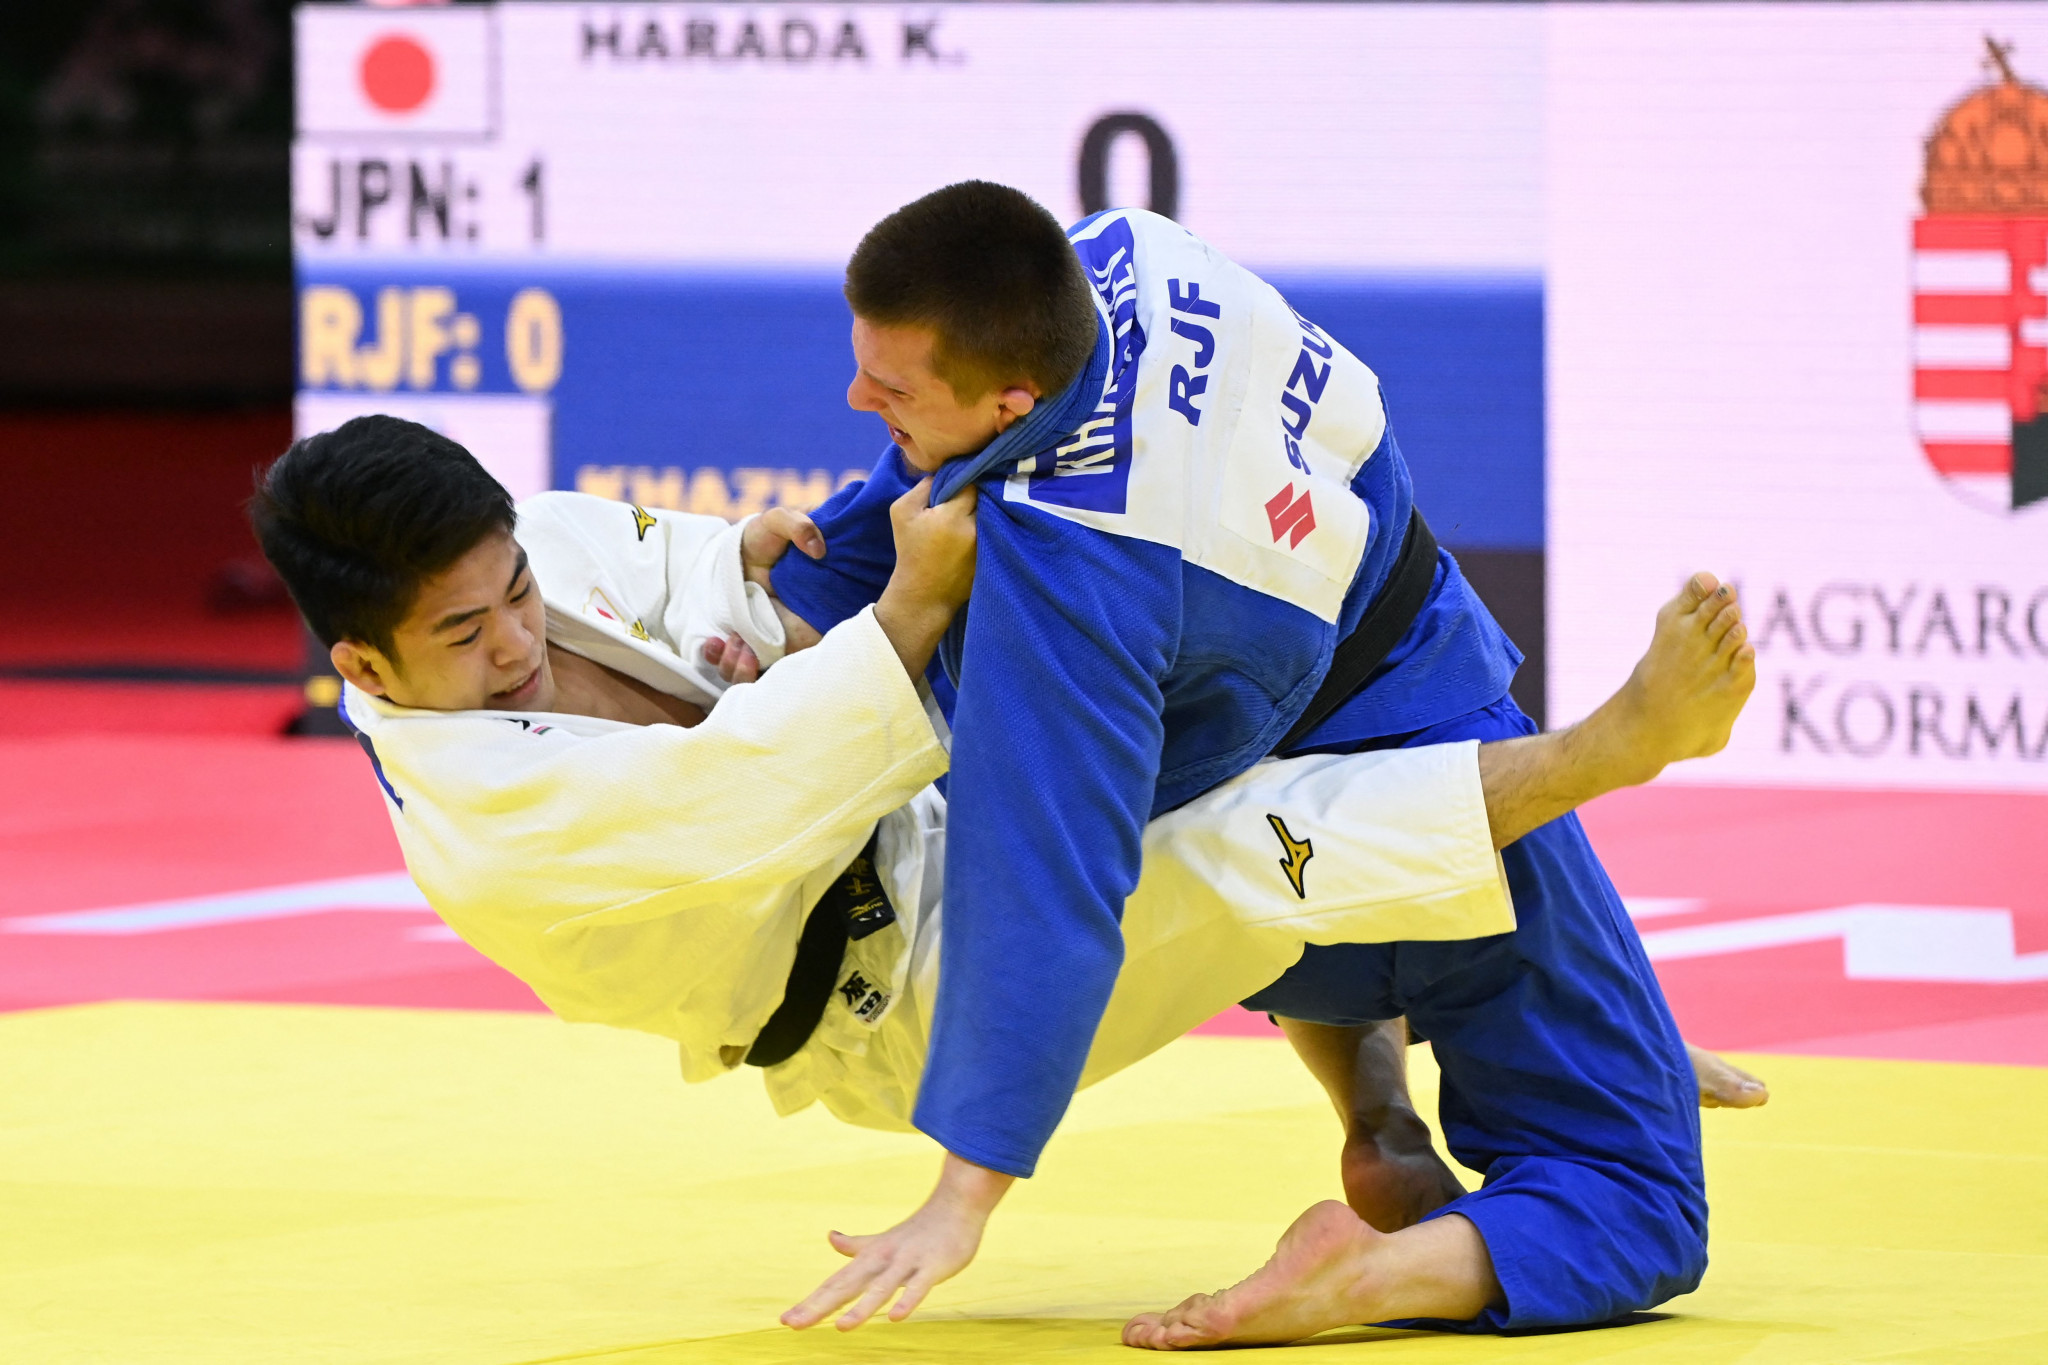 Japan win mixed team gold as World Judo Championships come to a close